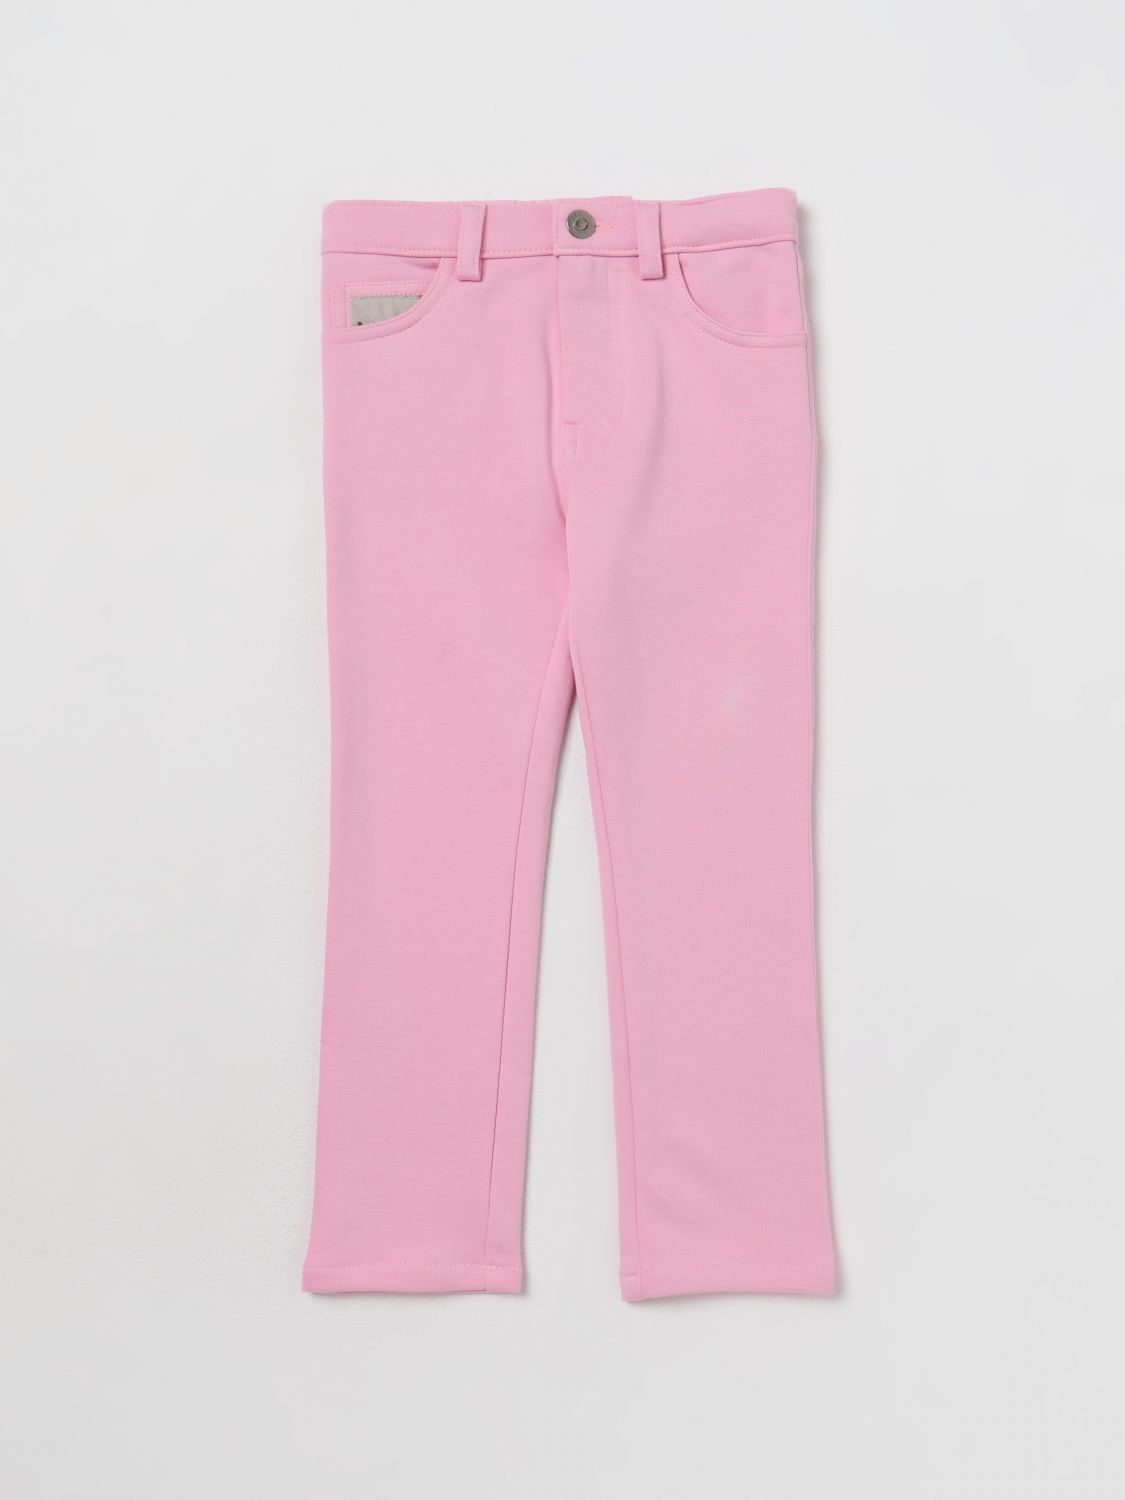 jeans n° 21 kids colour pink